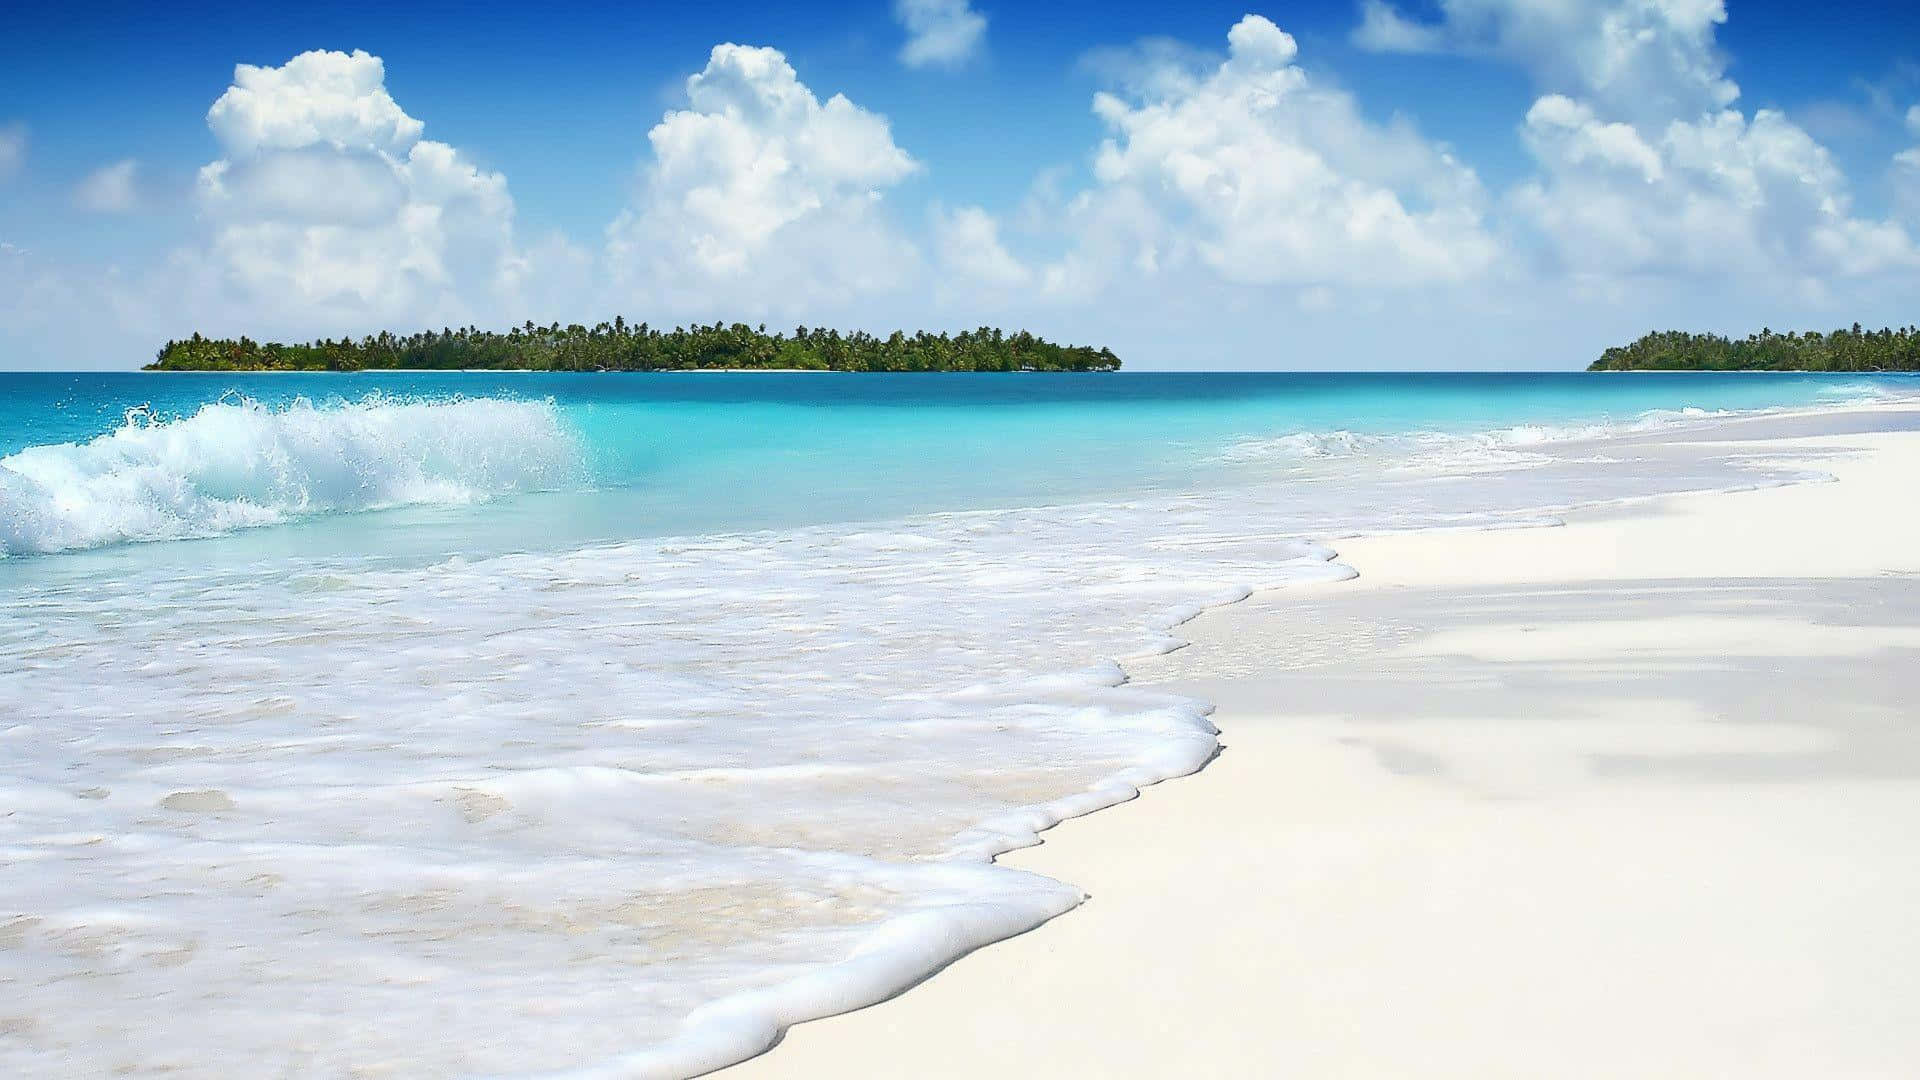 Take in the peaceful beauty of a high resolution beach.